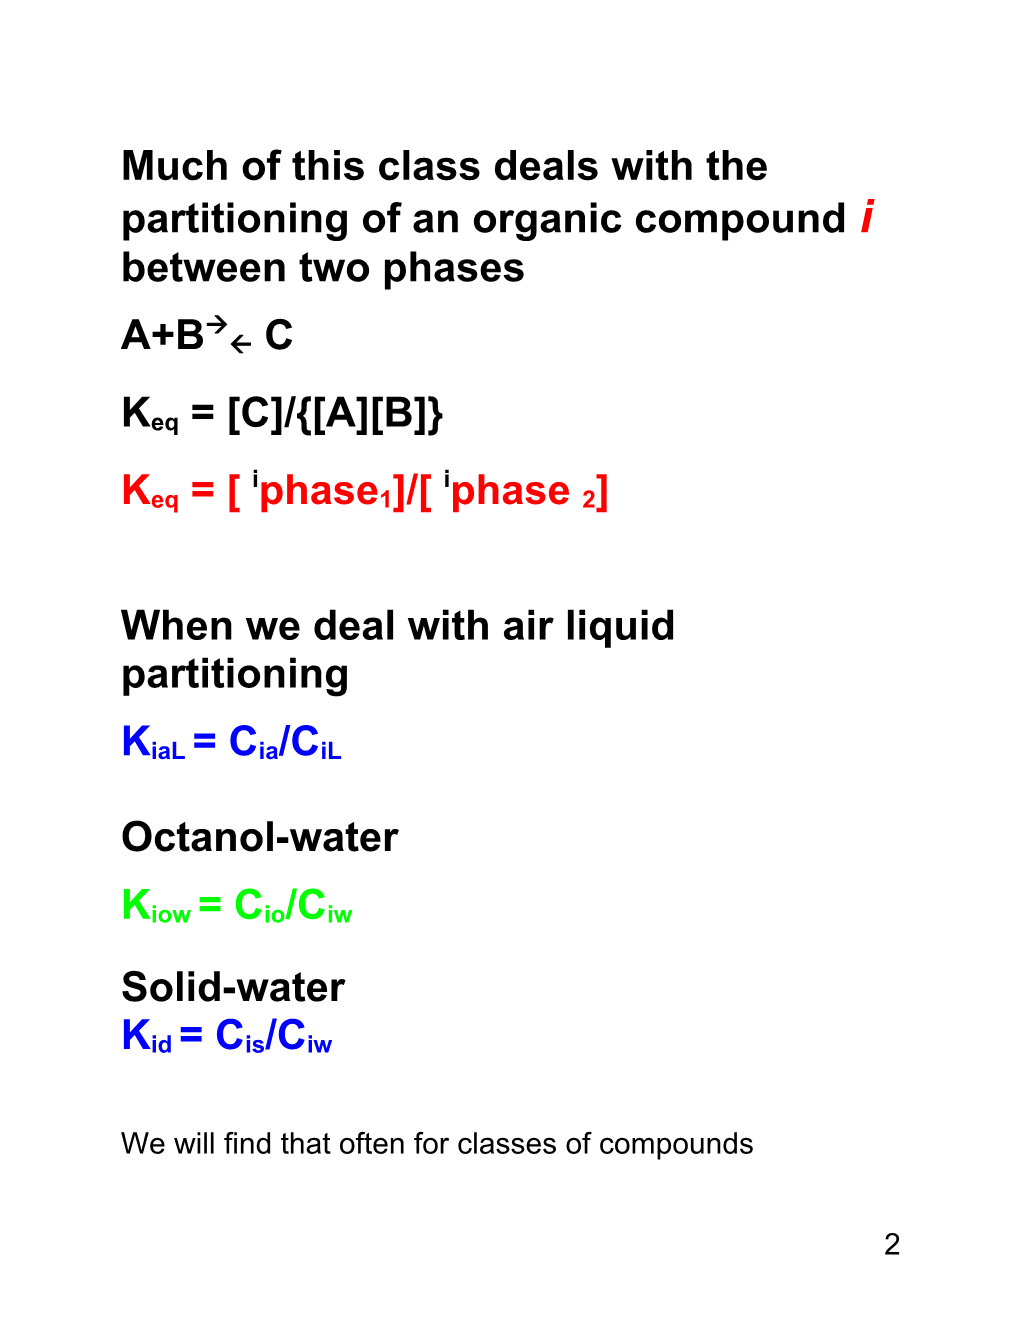 Intermolecular Forces and Partitioning